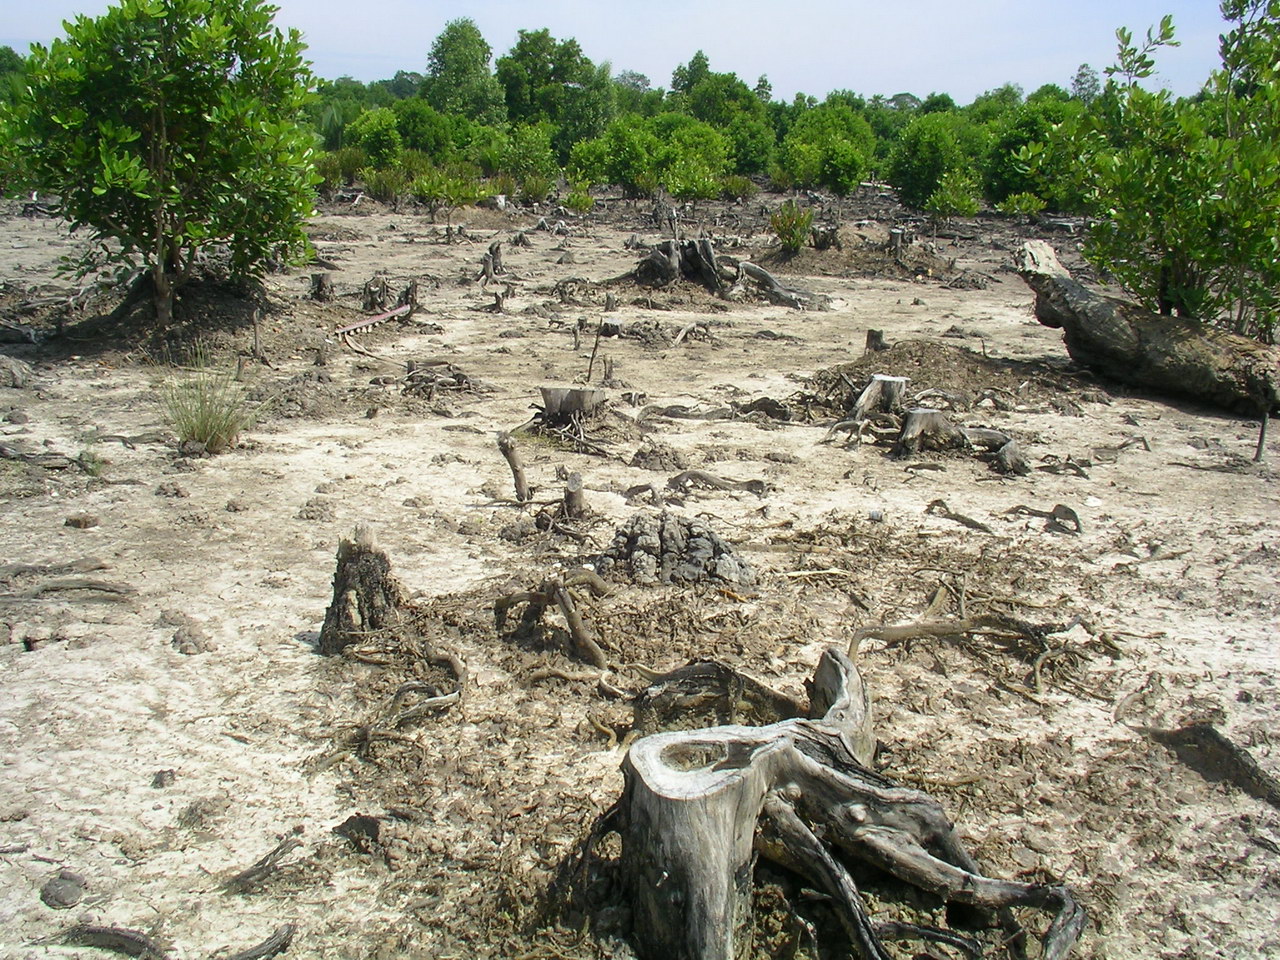 Cleared mangroves in Sumatra, Indonesia. 